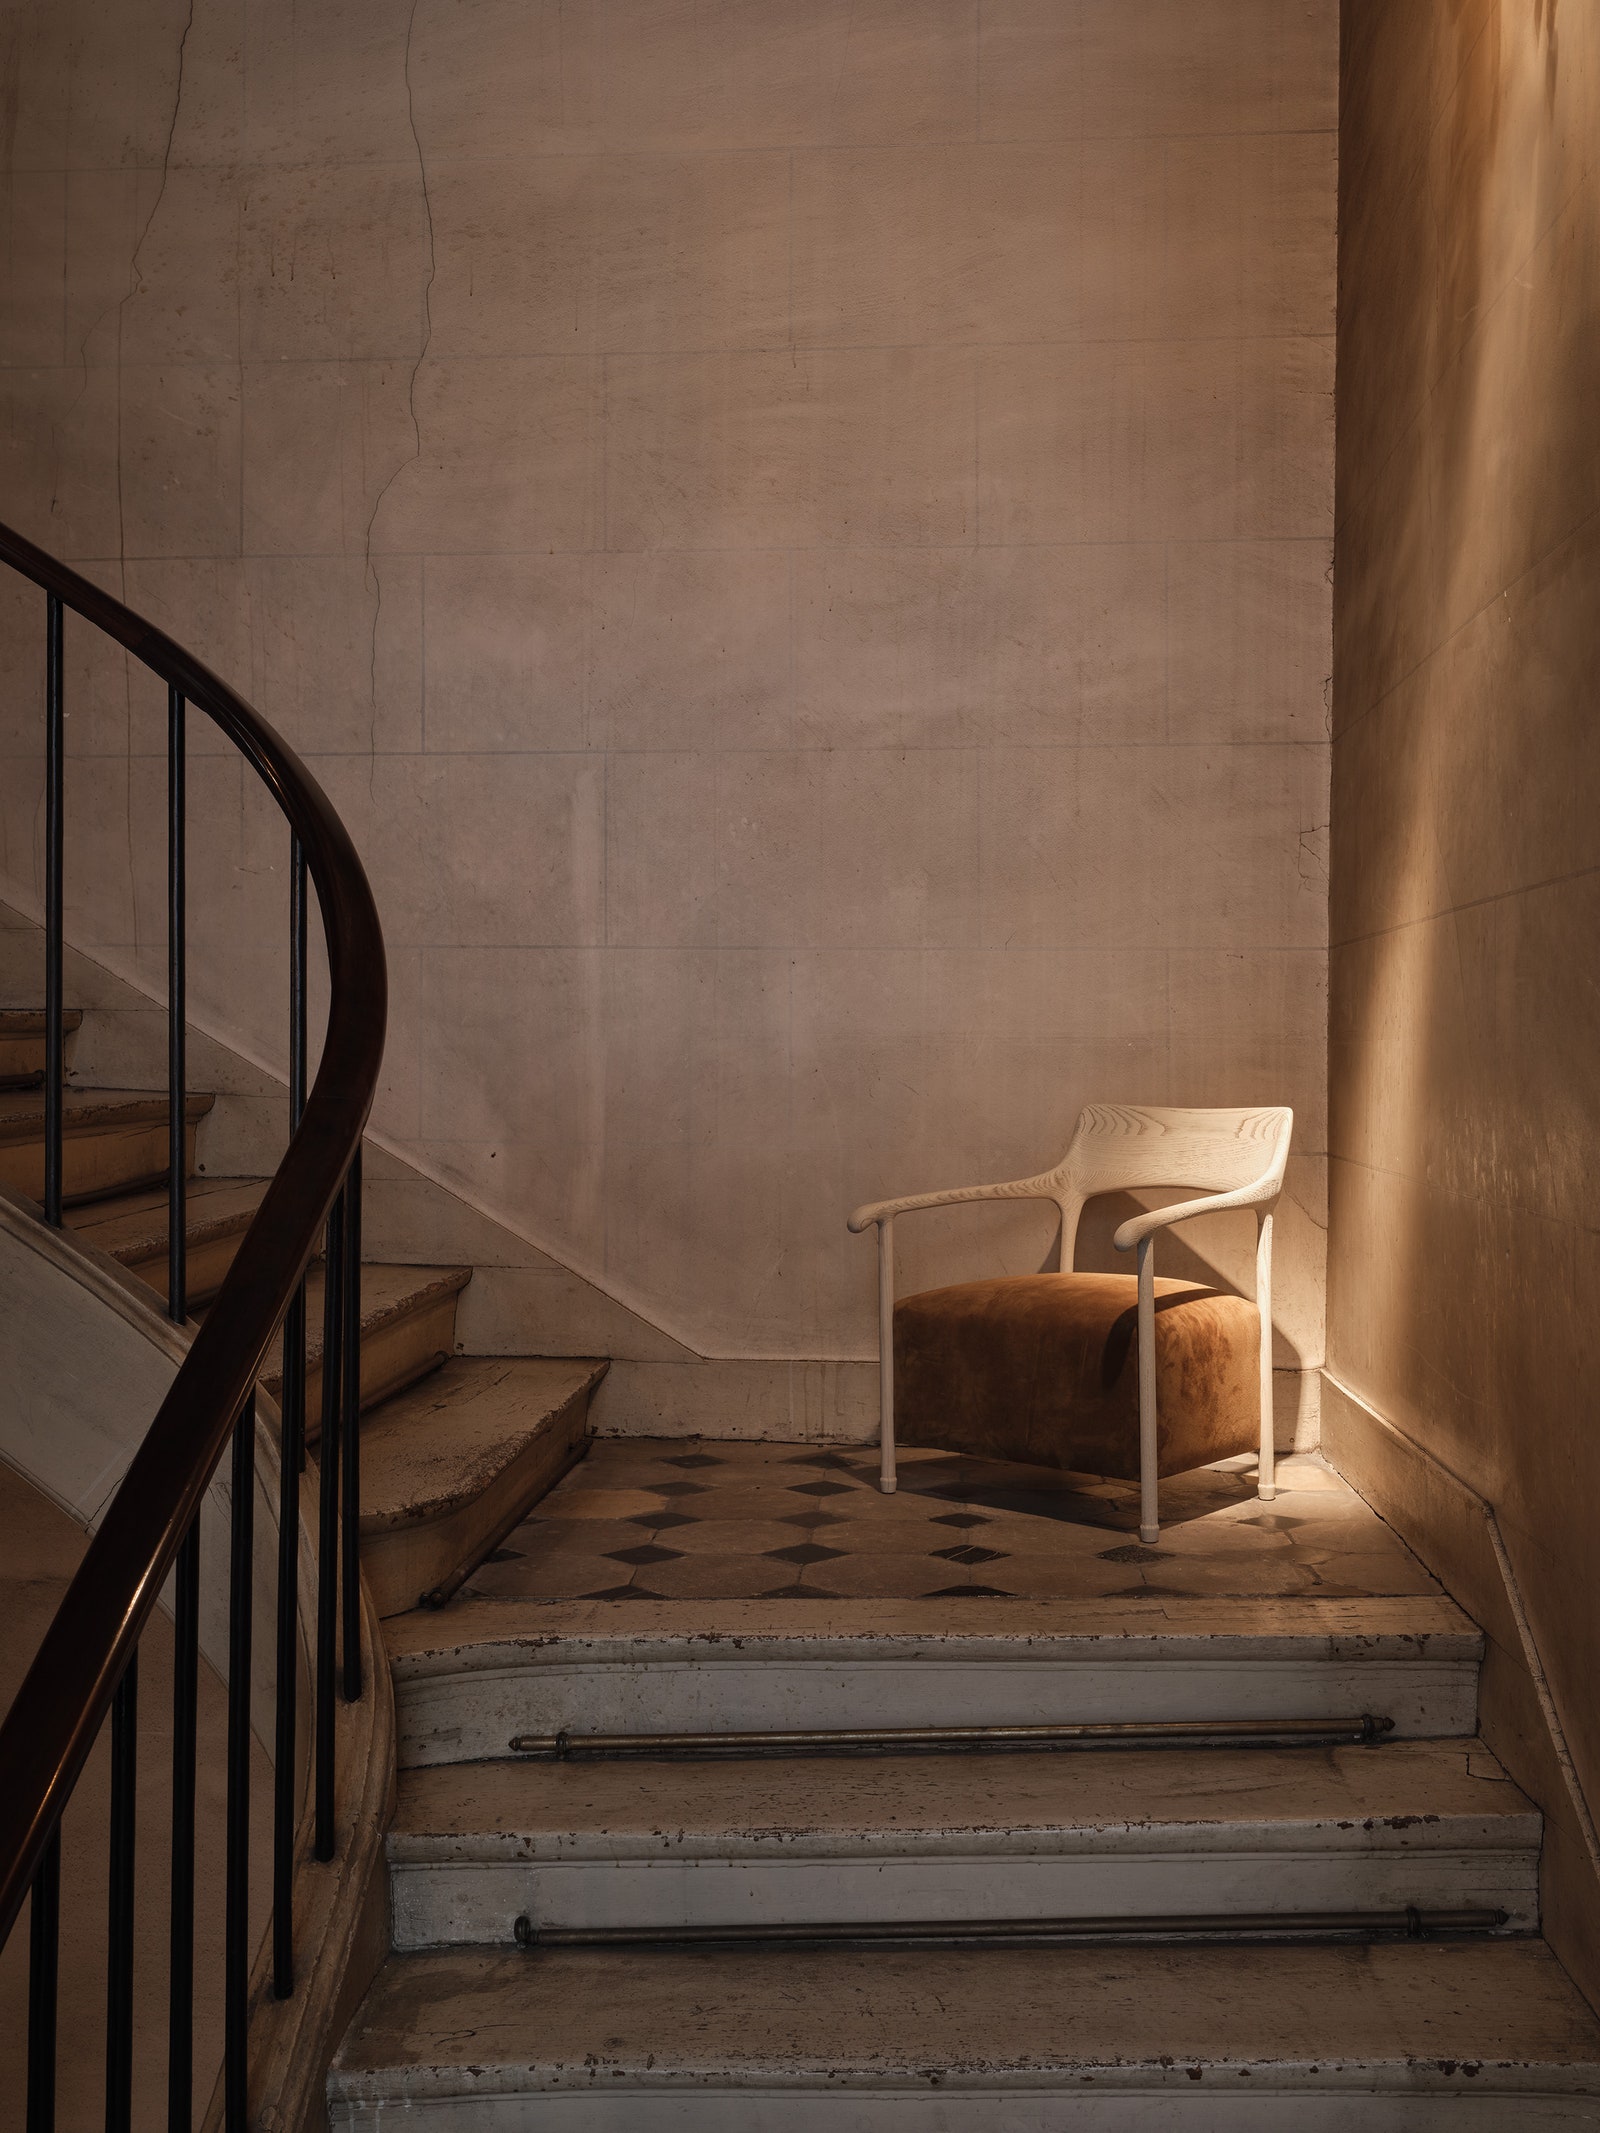 sculptural chair sitting at the landing of a staircase